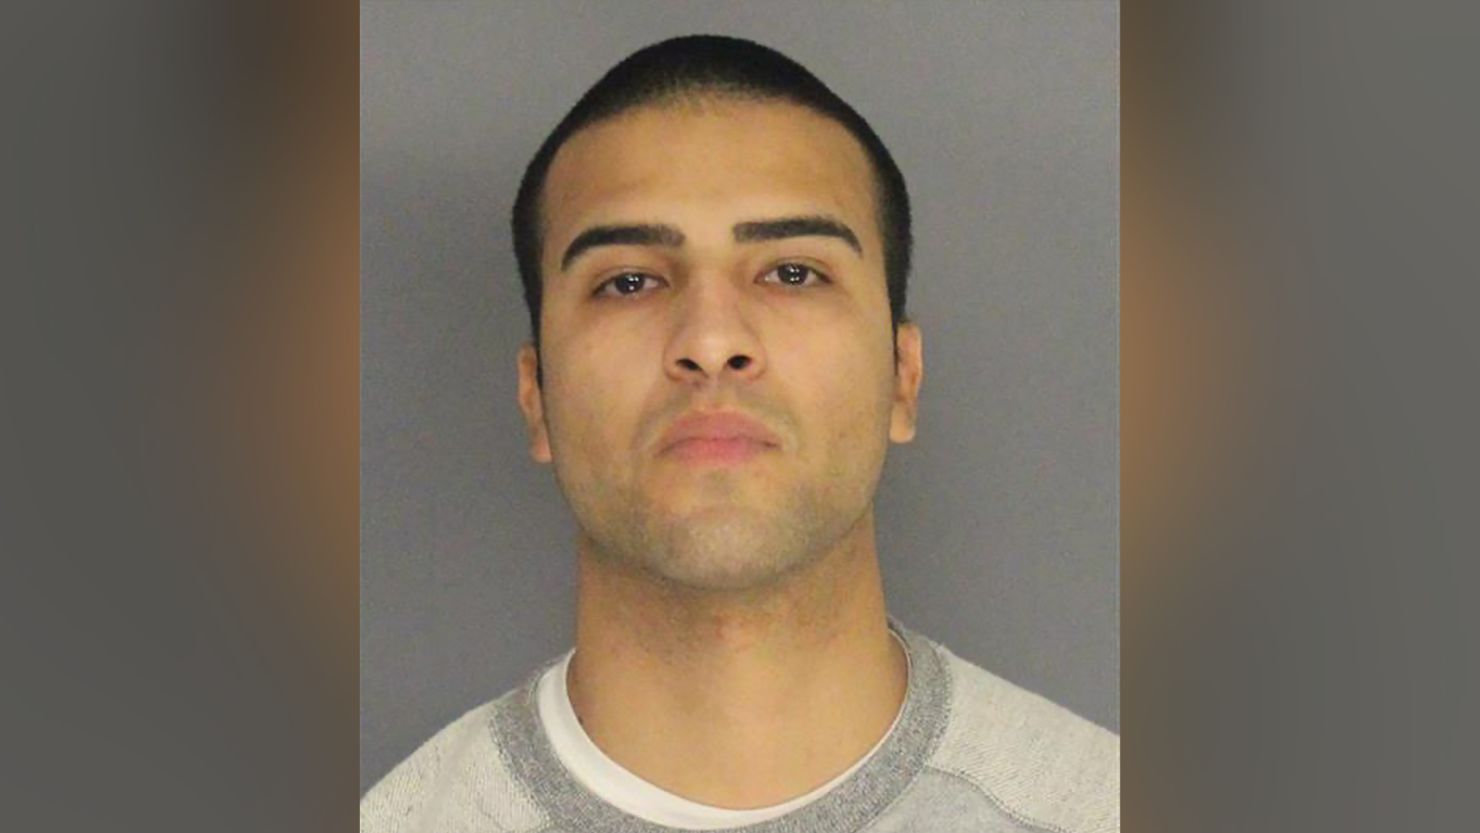 New Jersey police officer Louis Santiago faces multiple charges after allegedly being involved in a deadly hit-and-run crash.